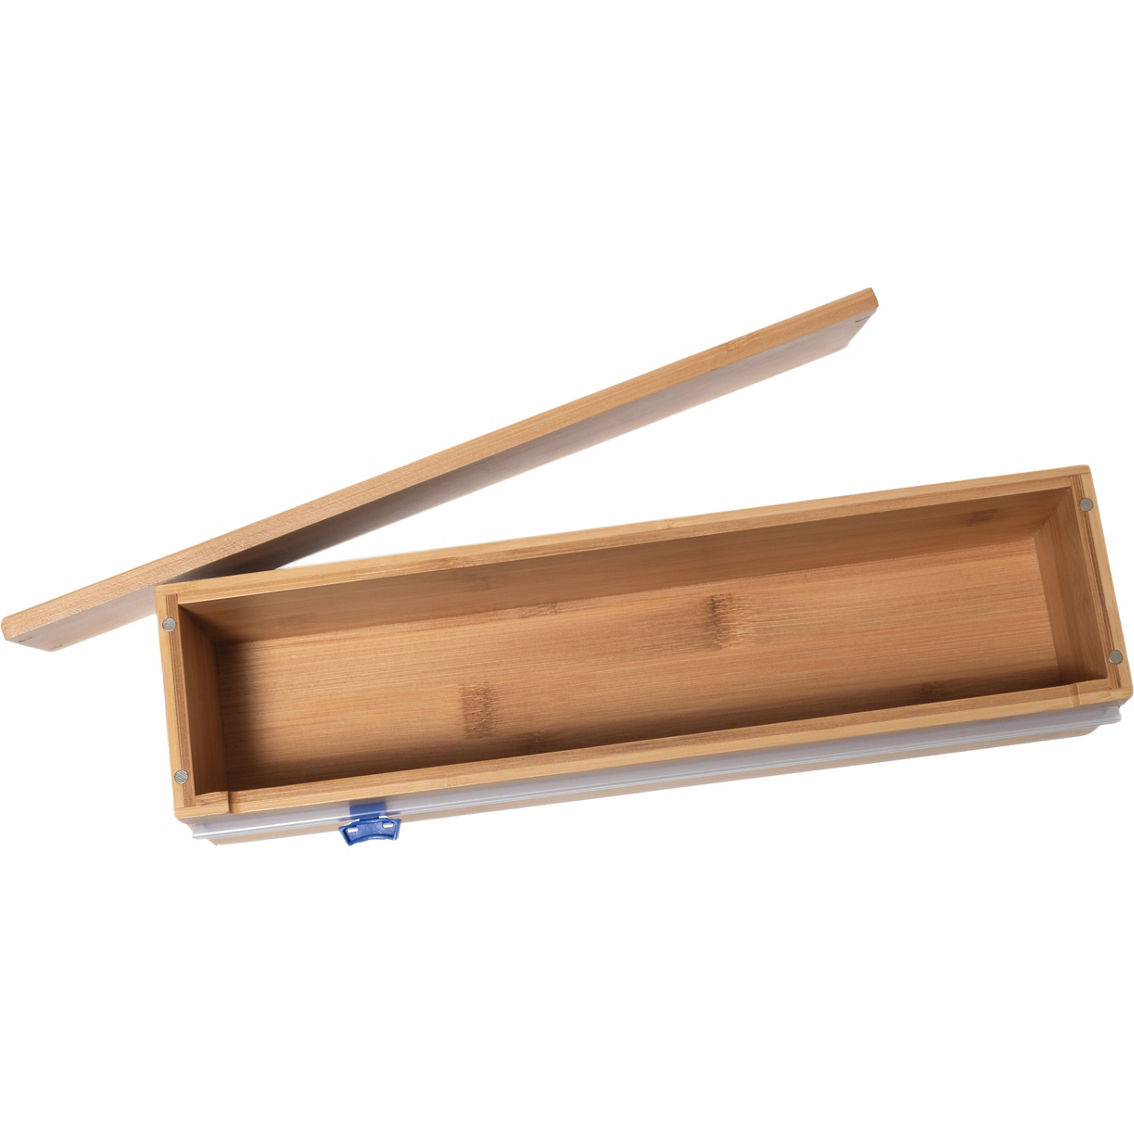 Lipper Bamboo Single Wrap Dispenser with Cutter - Image 4 of 5